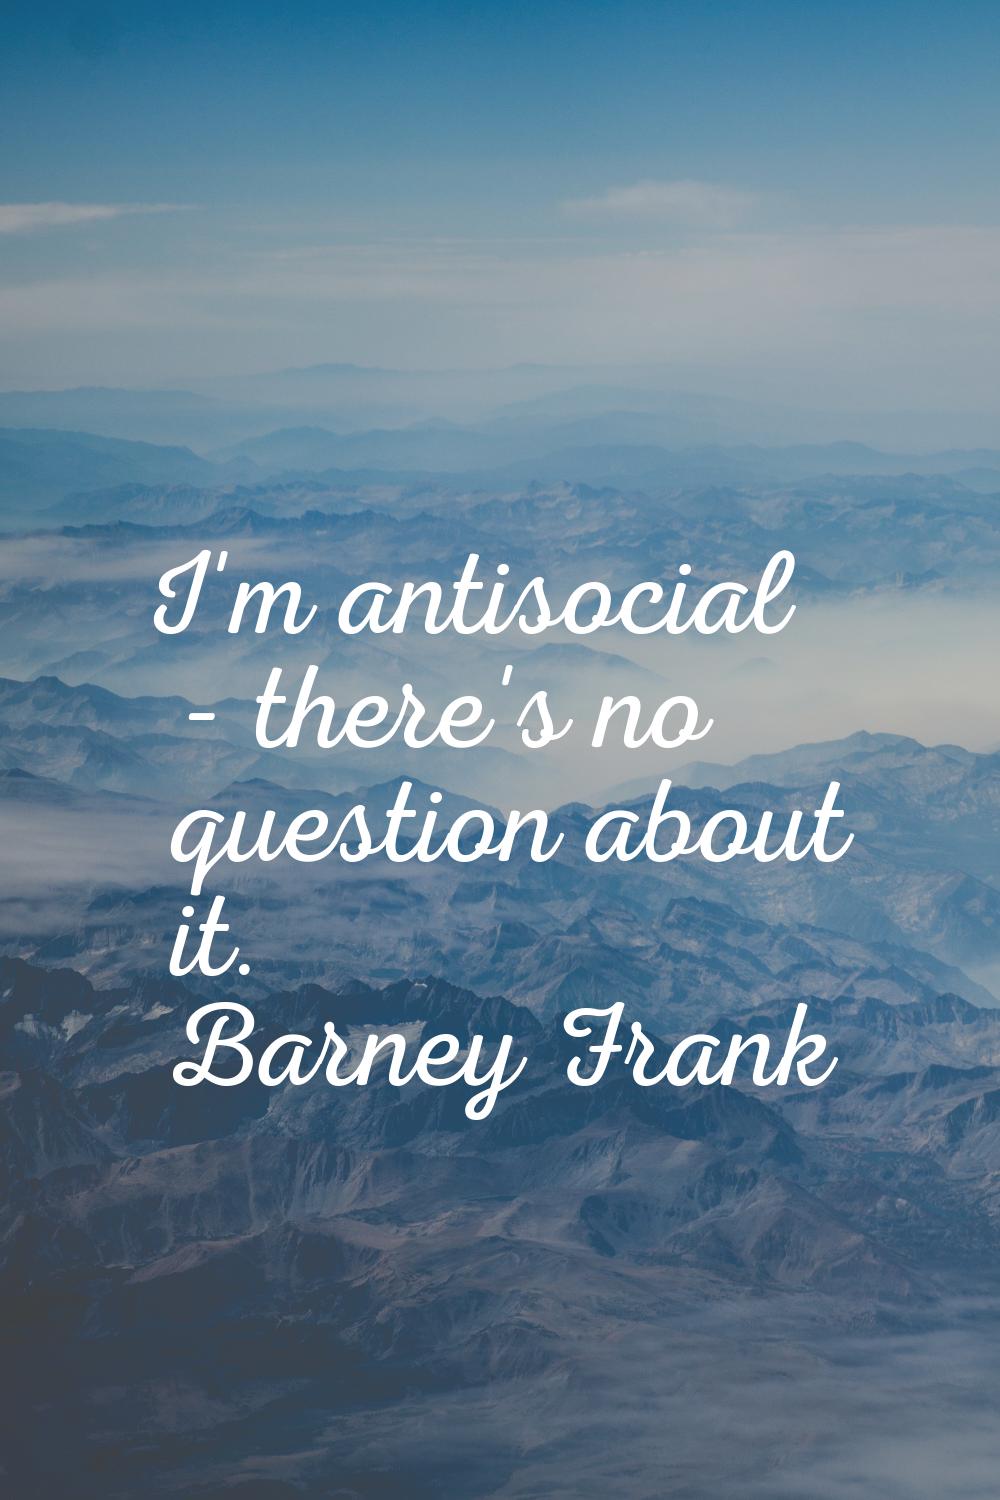 I'm antisocial - there's no question about it.